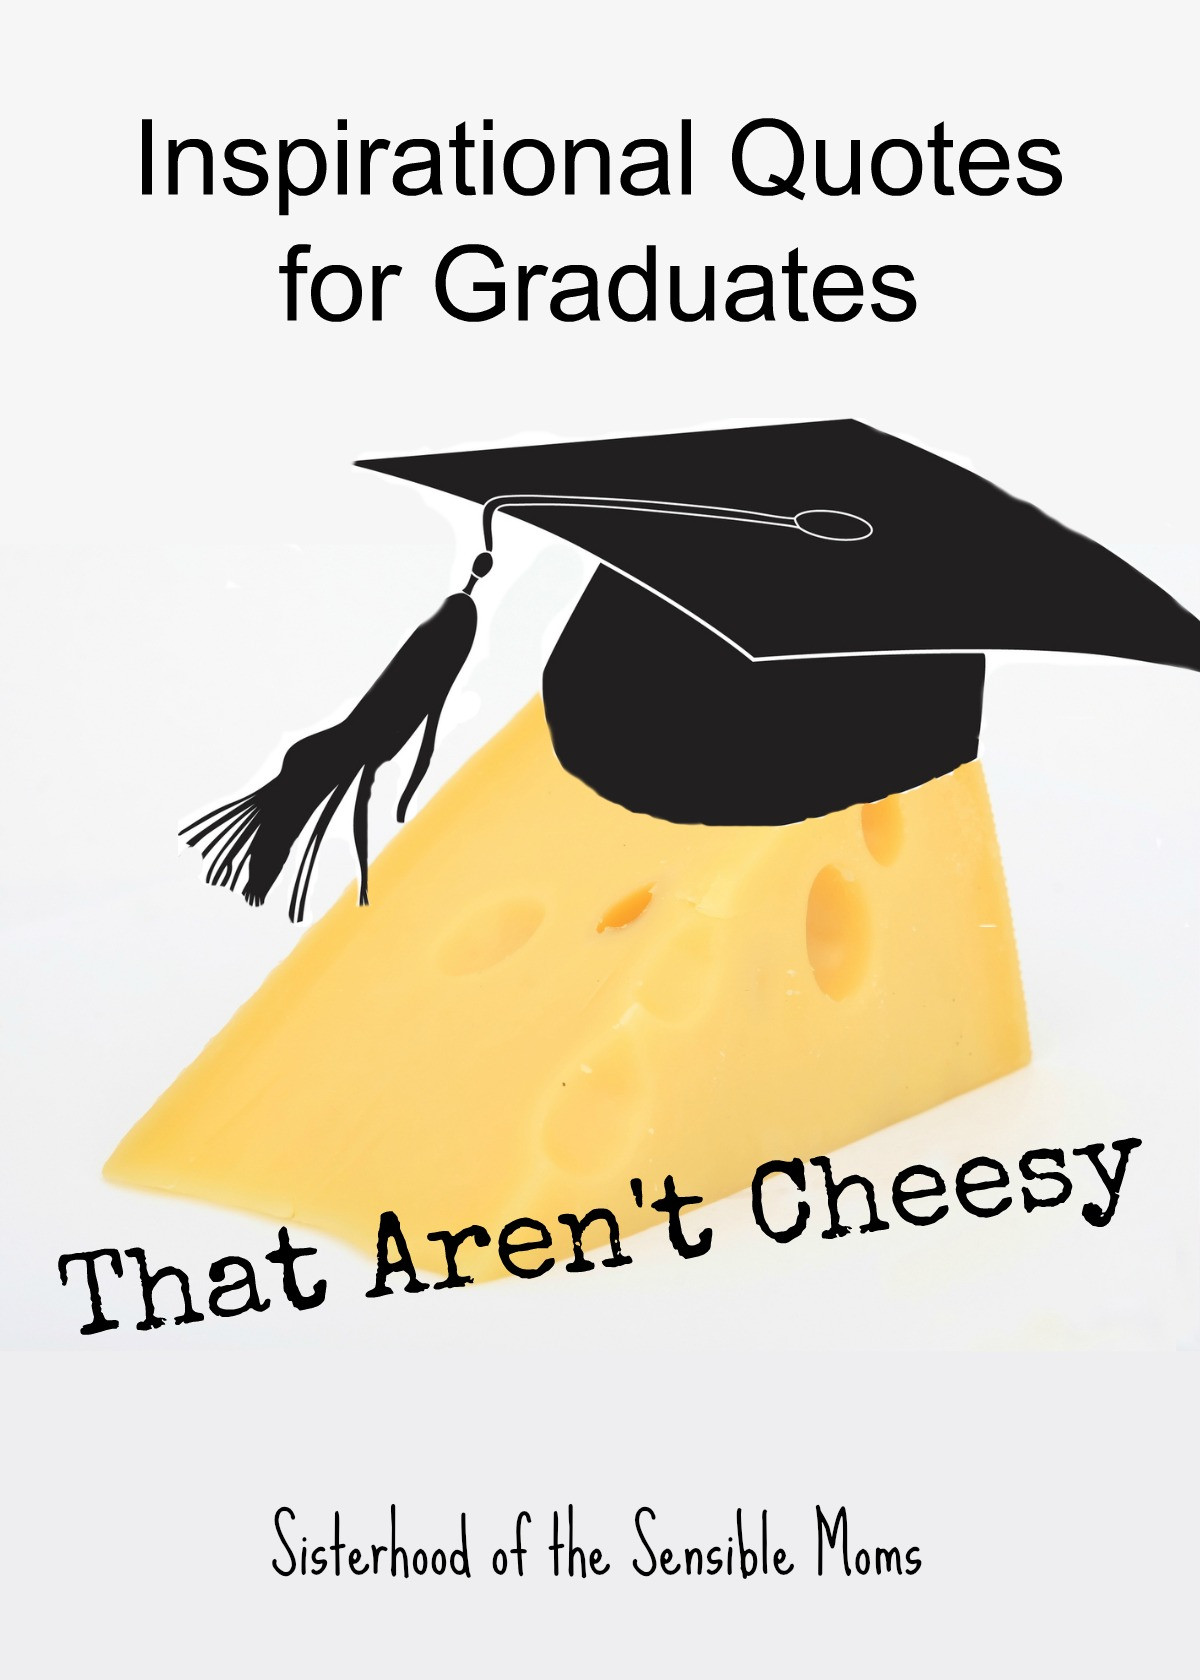 Inspirational Quotes Graduation
 Inspirational Quotes for Graduates That Aren t Cheesy